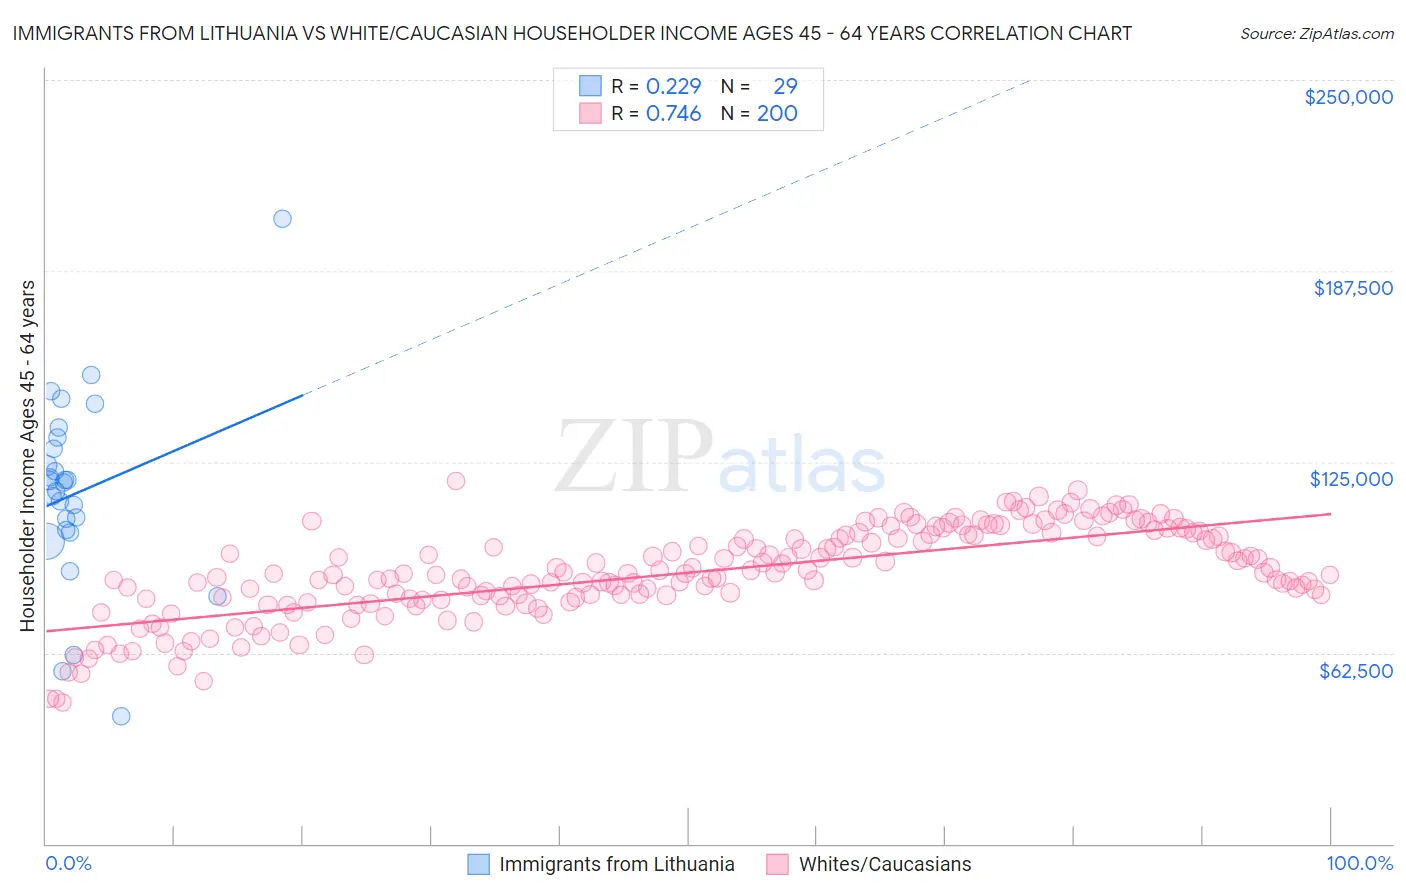 Immigrants from Lithuania vs White/Caucasian Householder Income Ages 45 - 64 years